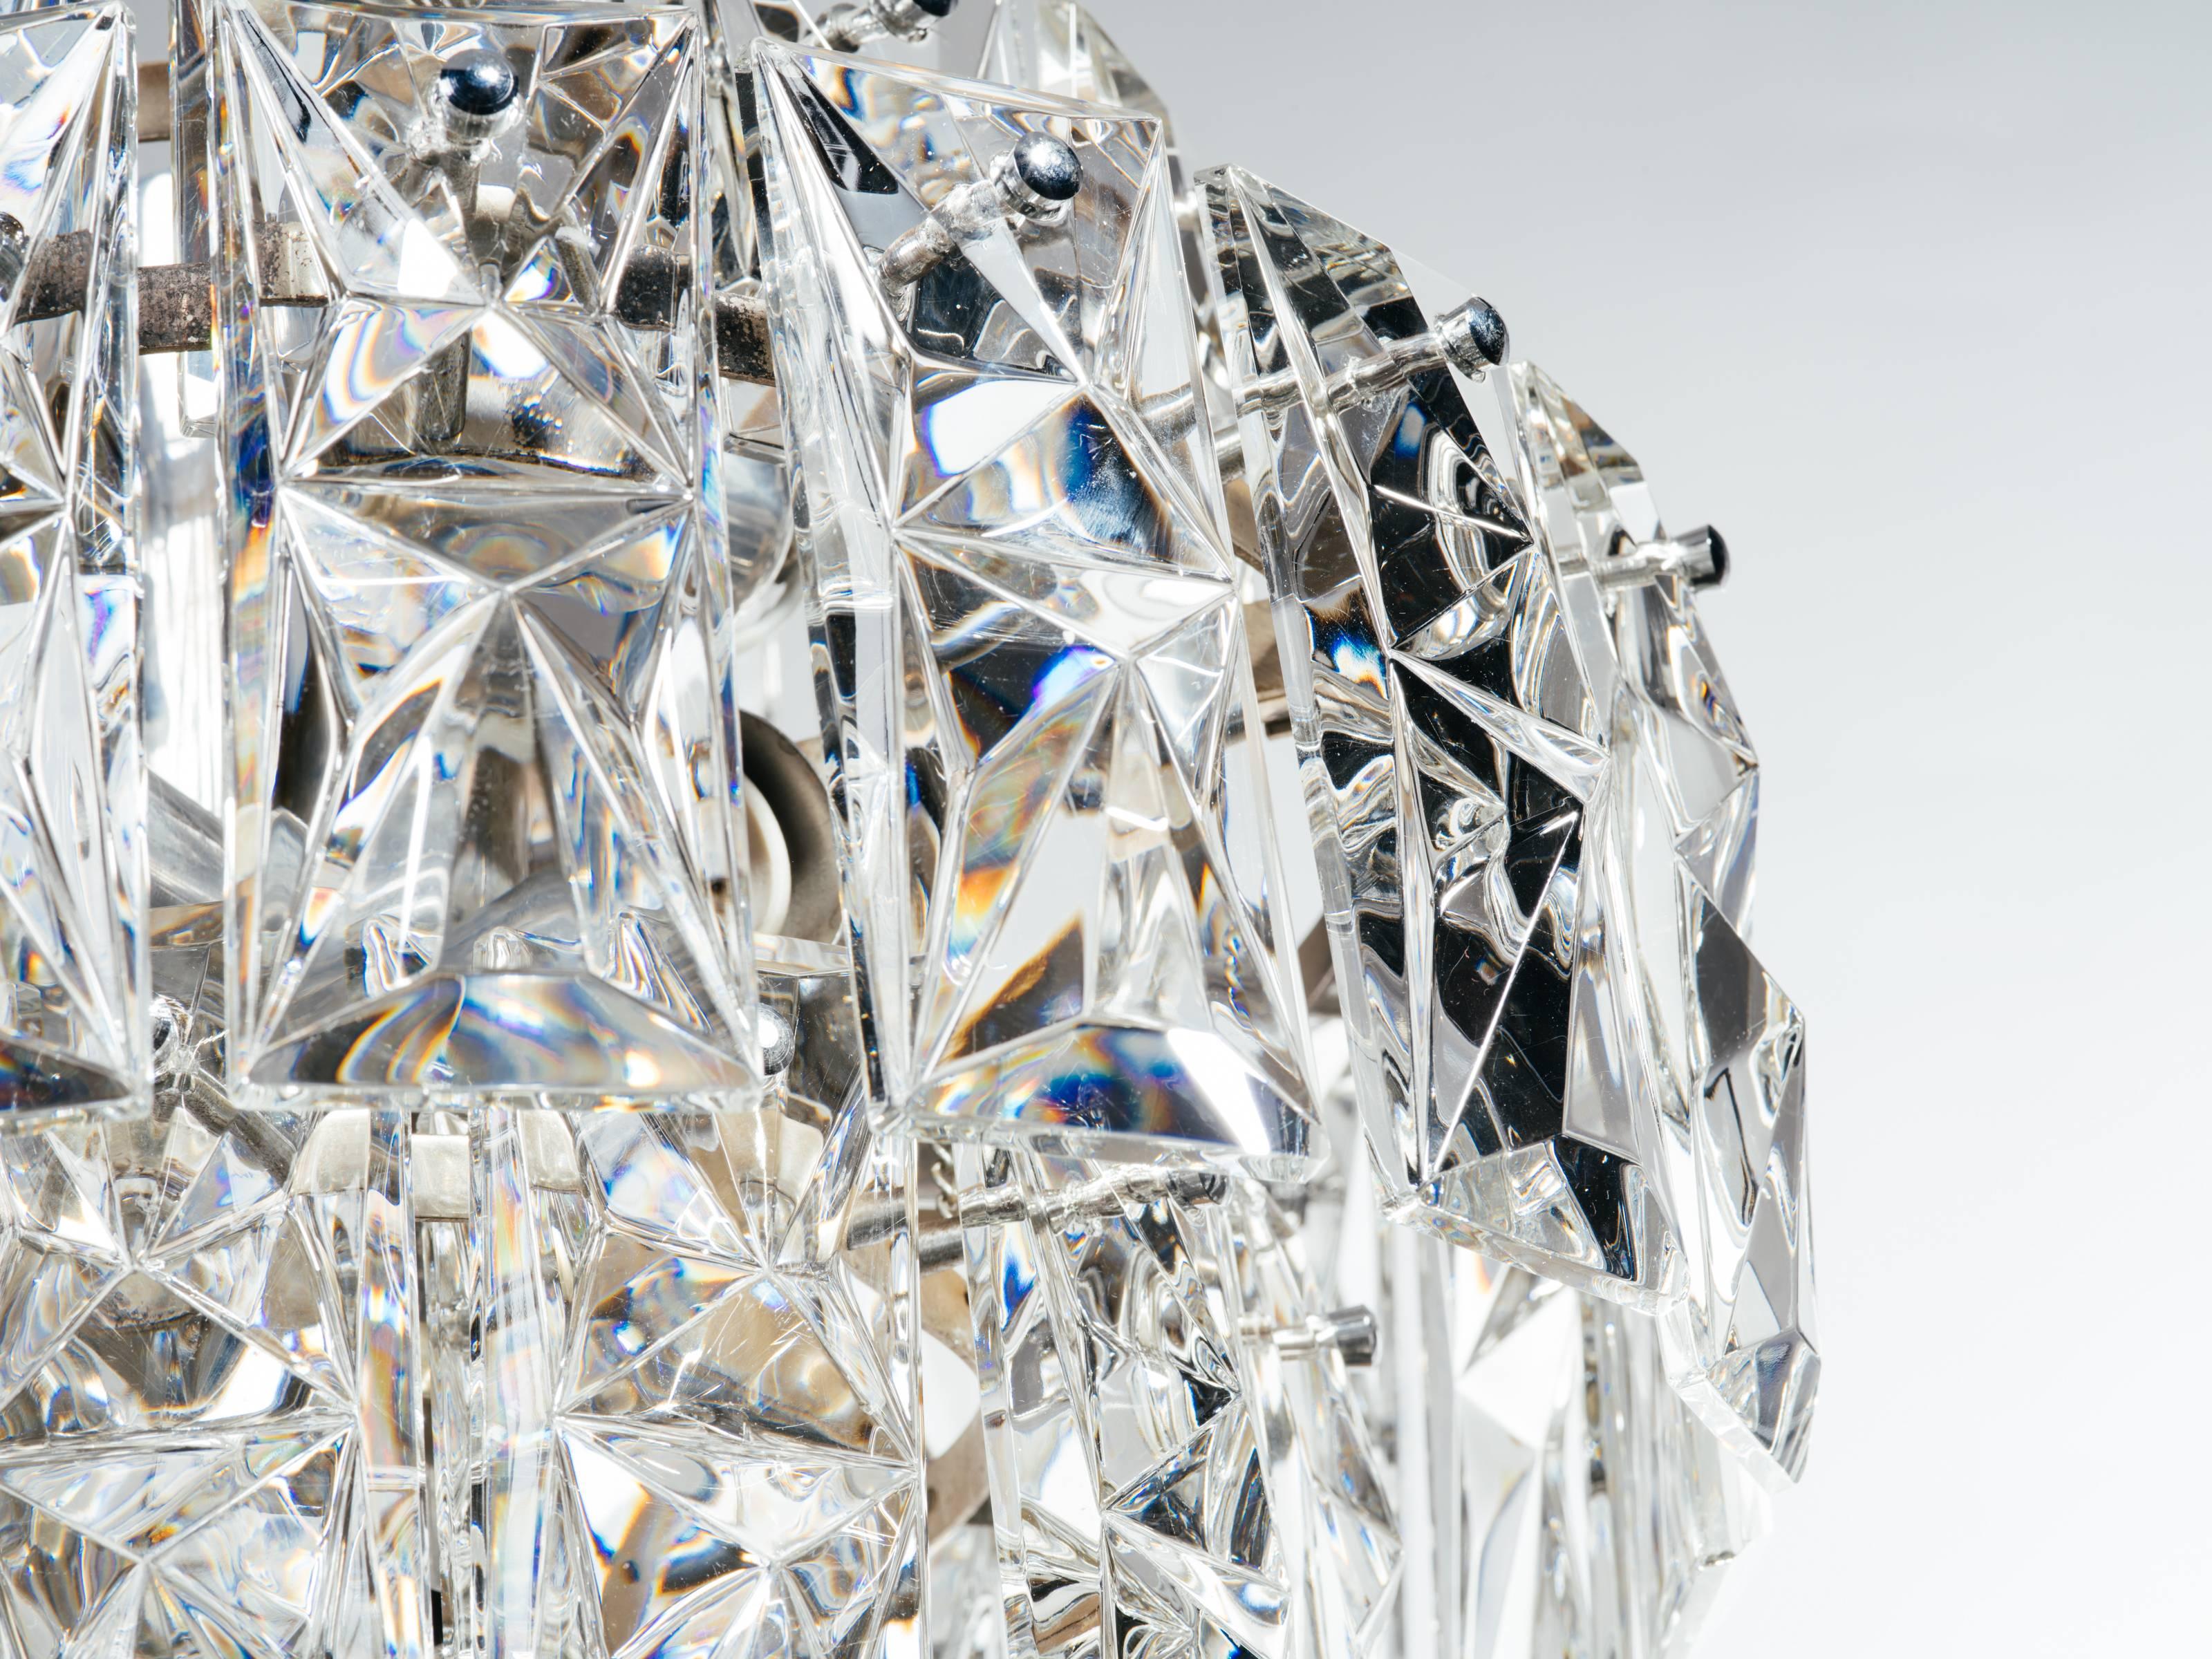 Faceted Crystal Prism Chandelier by Kinkeldey, Germany, c. 1960's In Fair Condition For Sale In Fort Lauderdale, FL